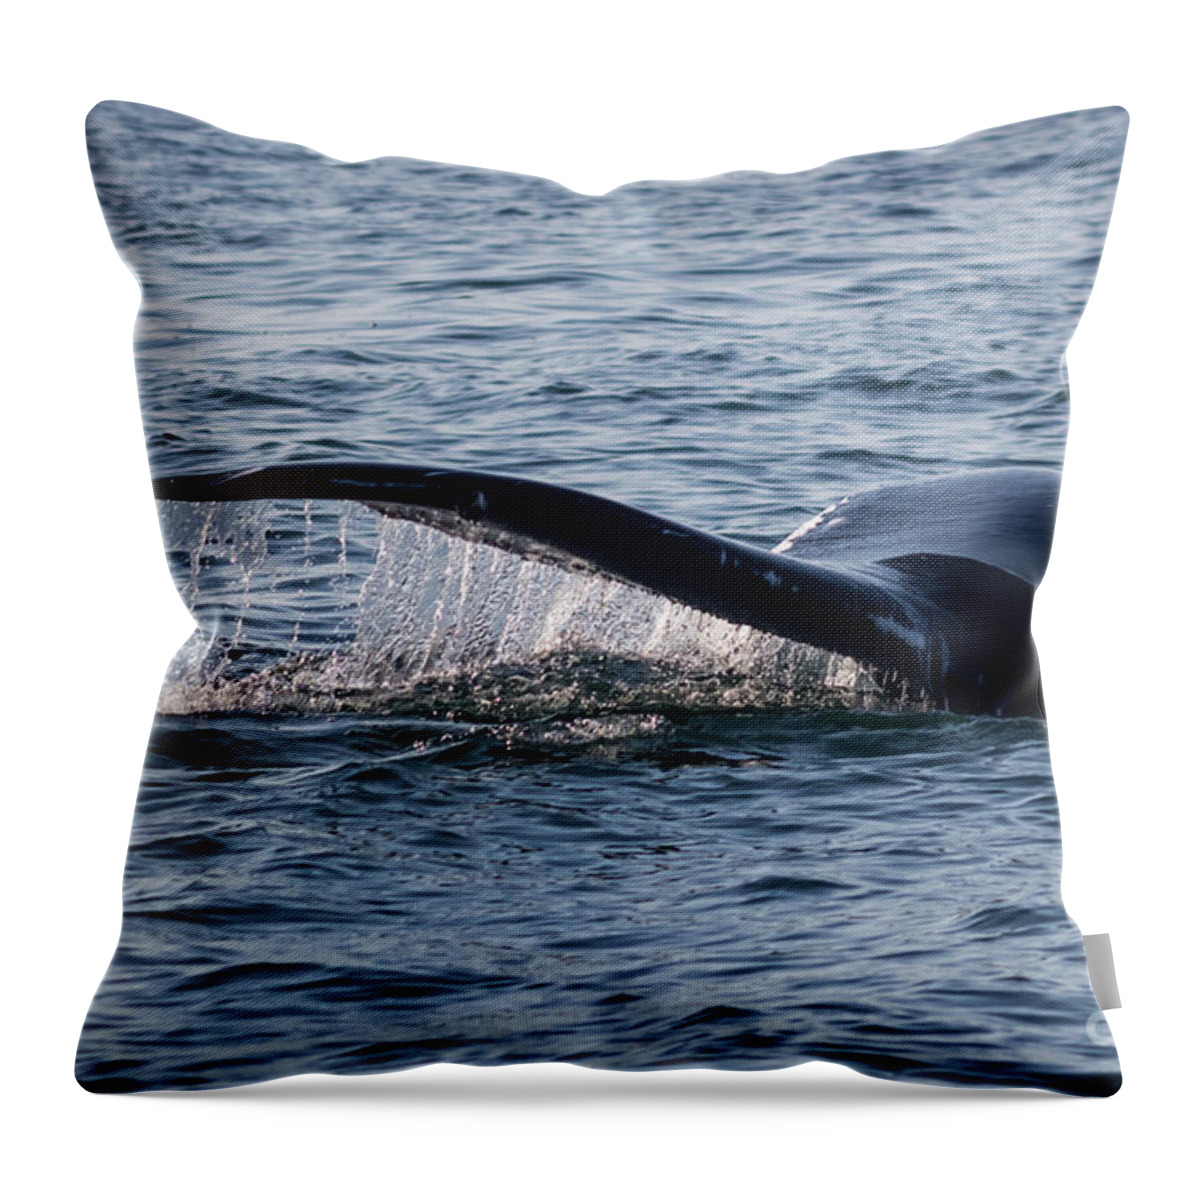 Whale Throw Pillow featuring the photograph A Whale Tail by Suzanne Luft